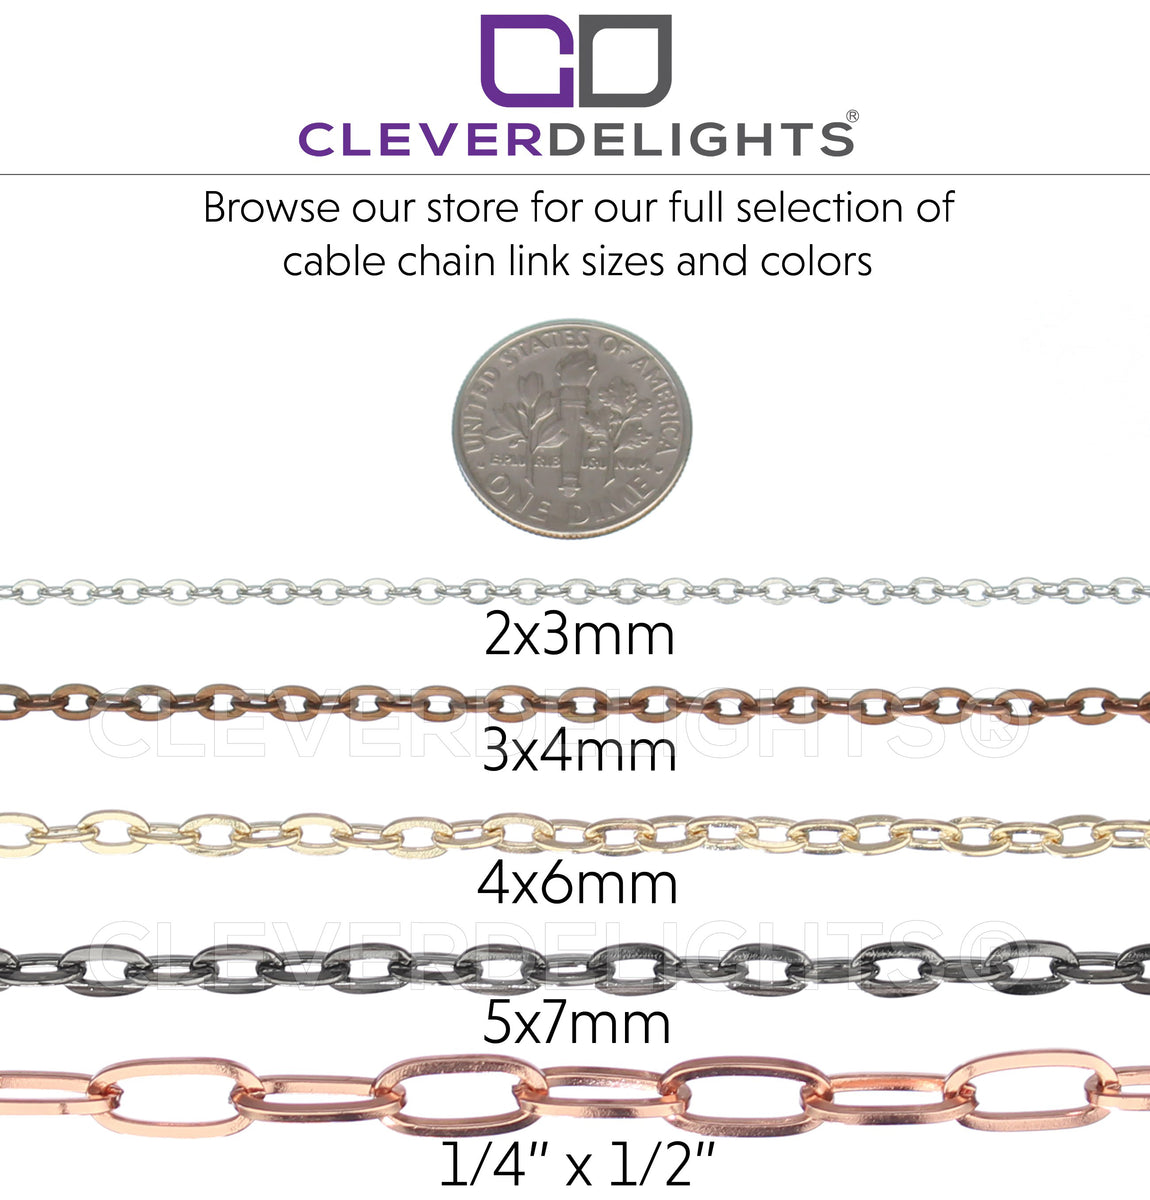 CleverDelights 4x6mm Cable Chain - Antique Bronze Color - 30 Feet